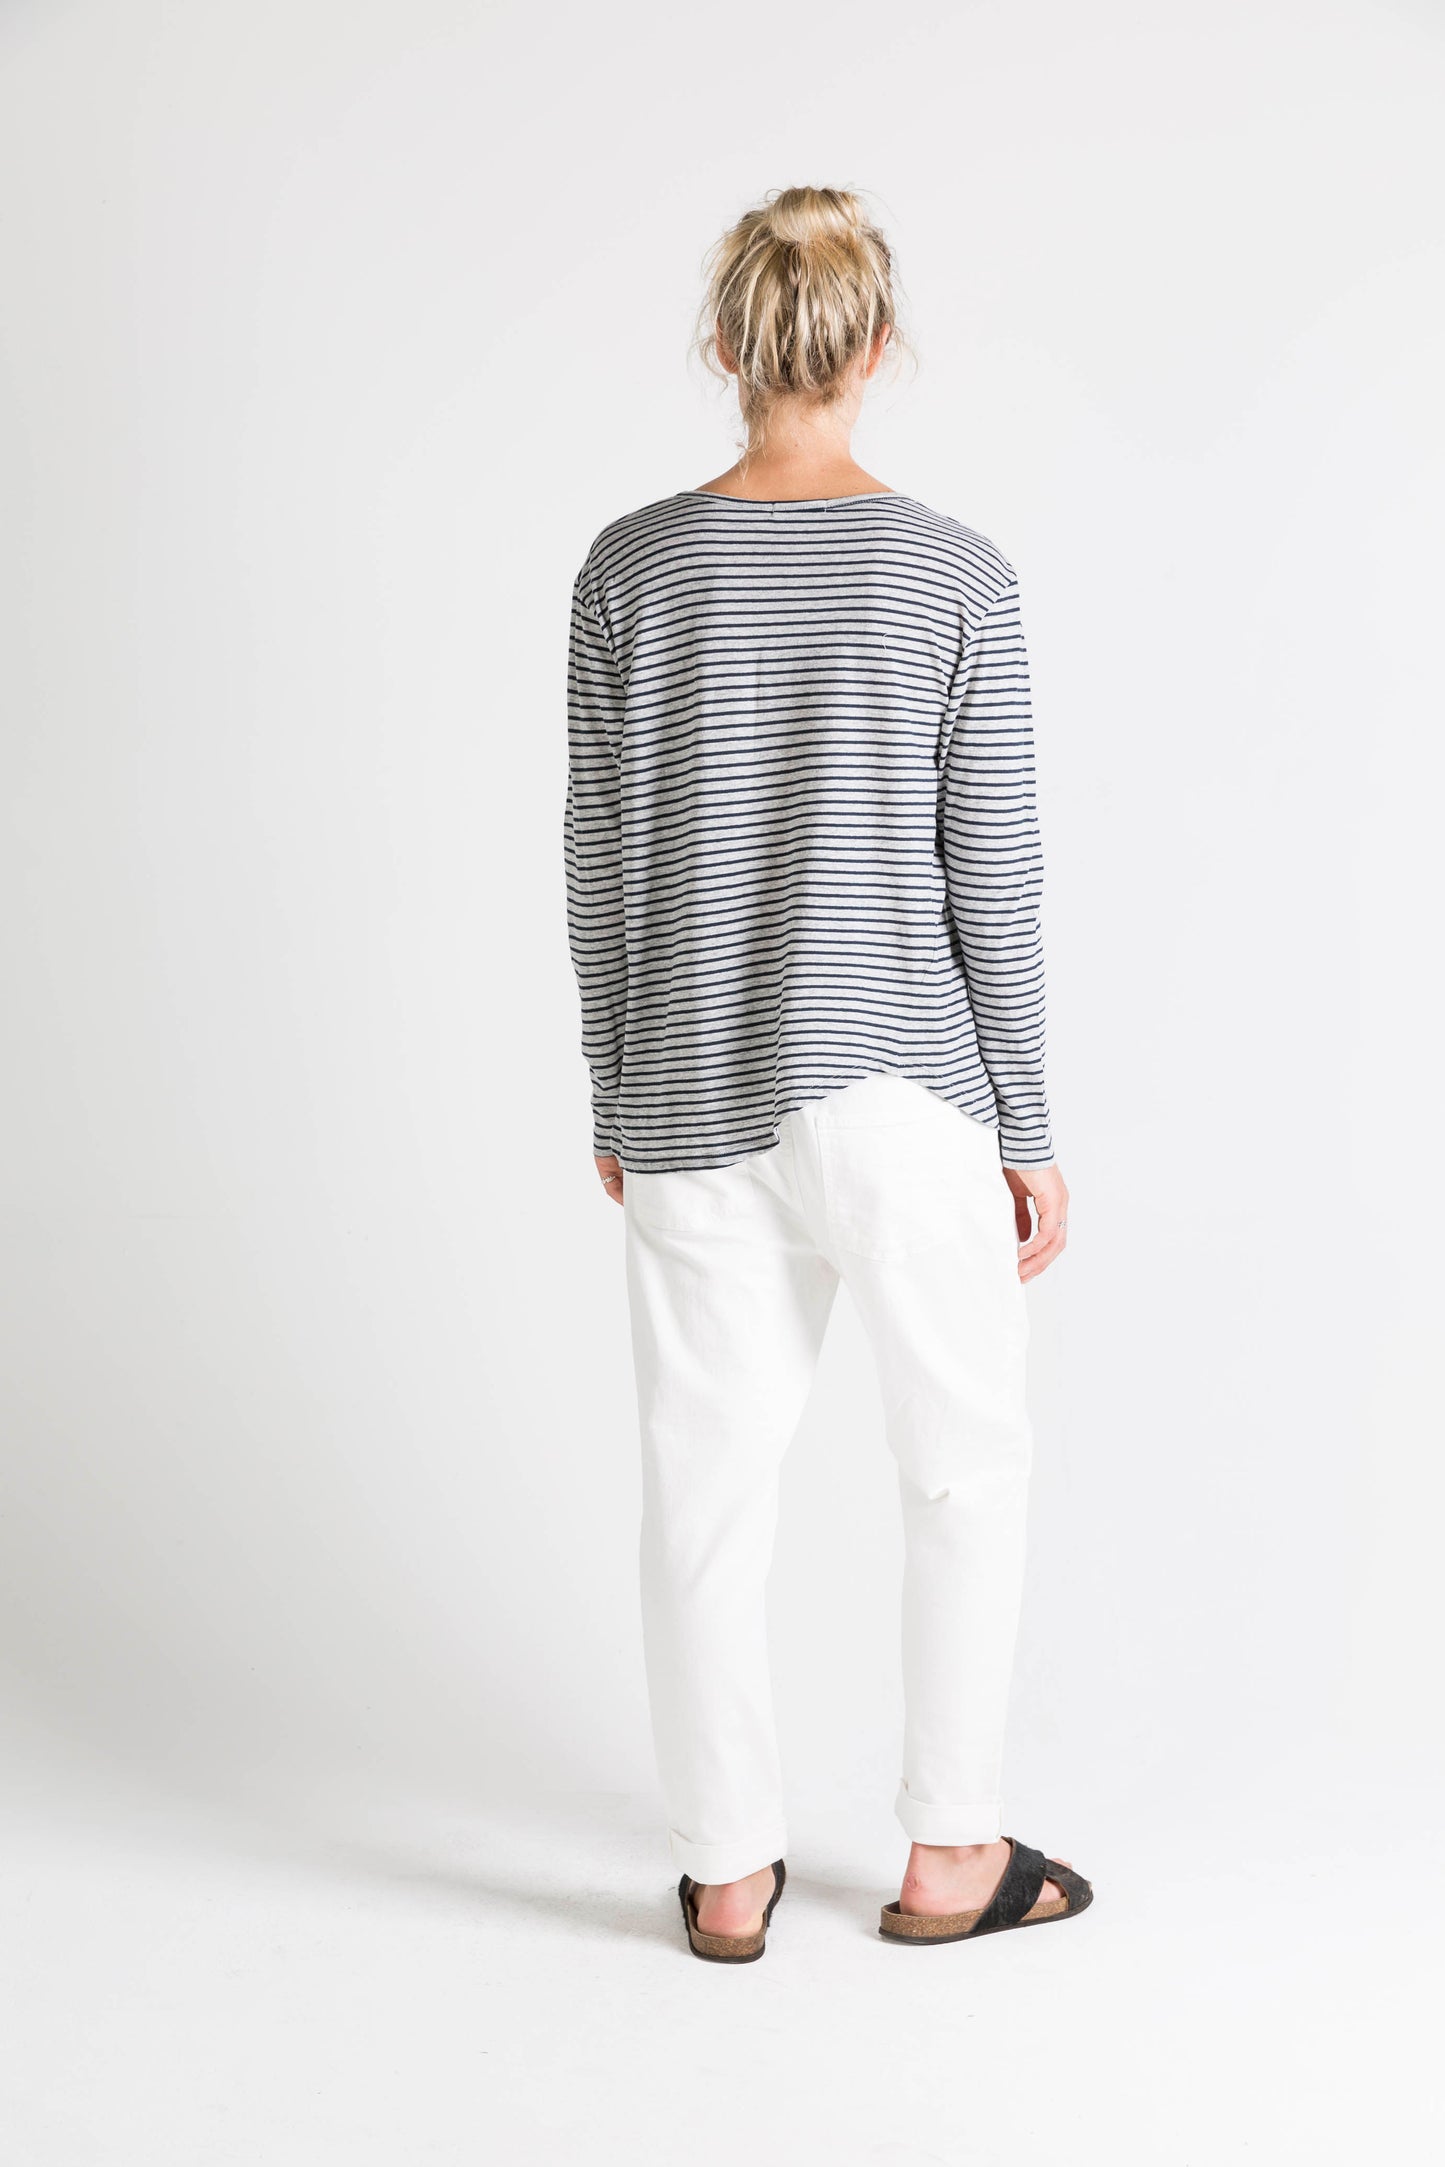 Ophelia and Ryder Long Sleeved Top